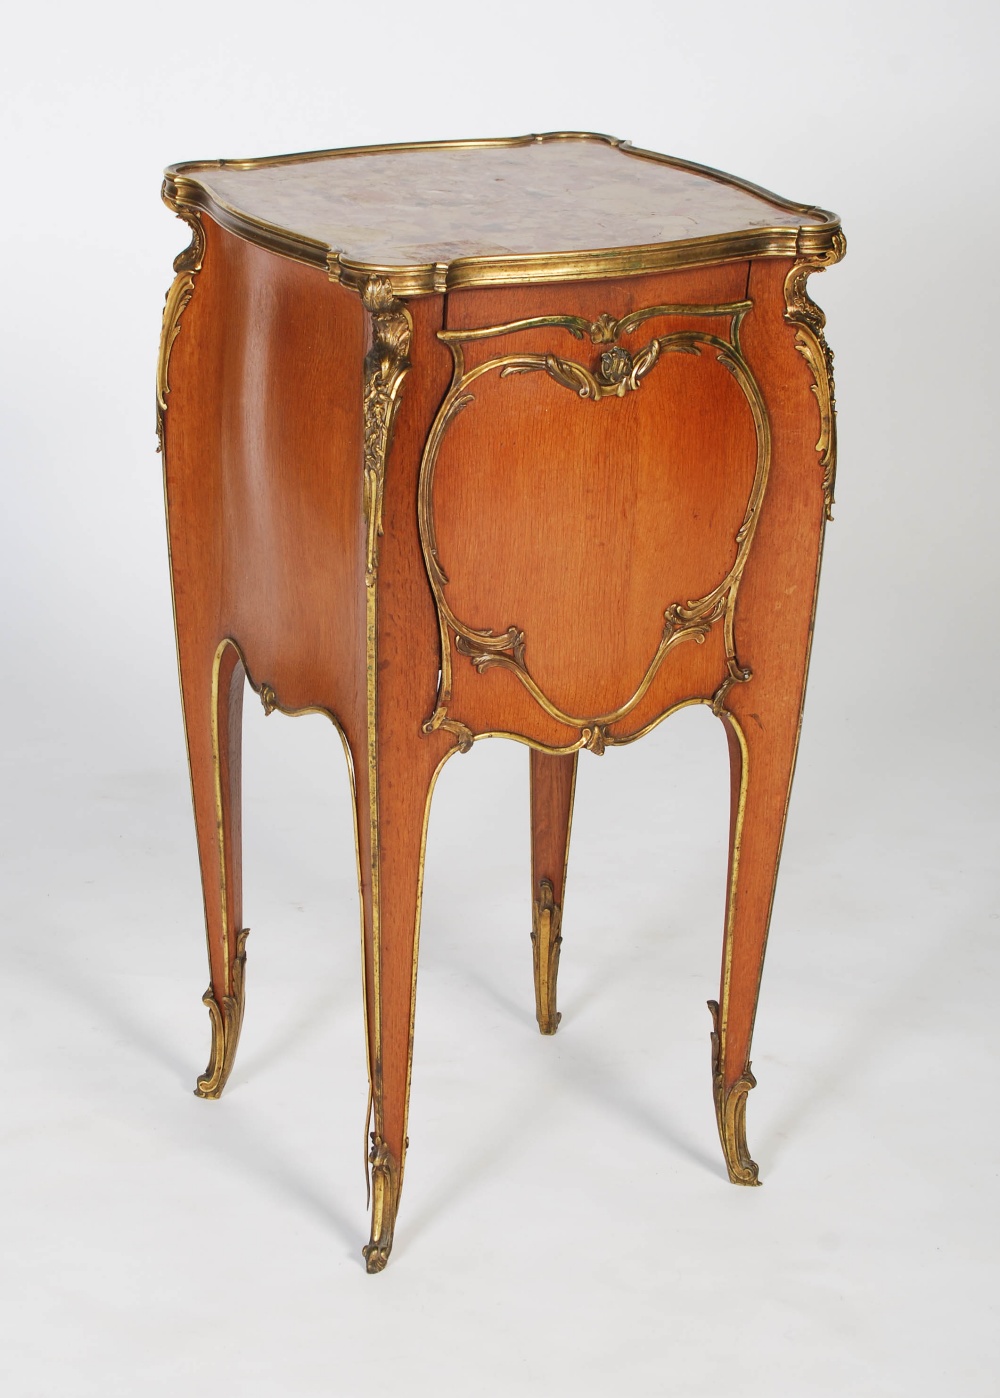 An early 20th century French oak and gilt bronze mounted marble topped bedside table in the manner